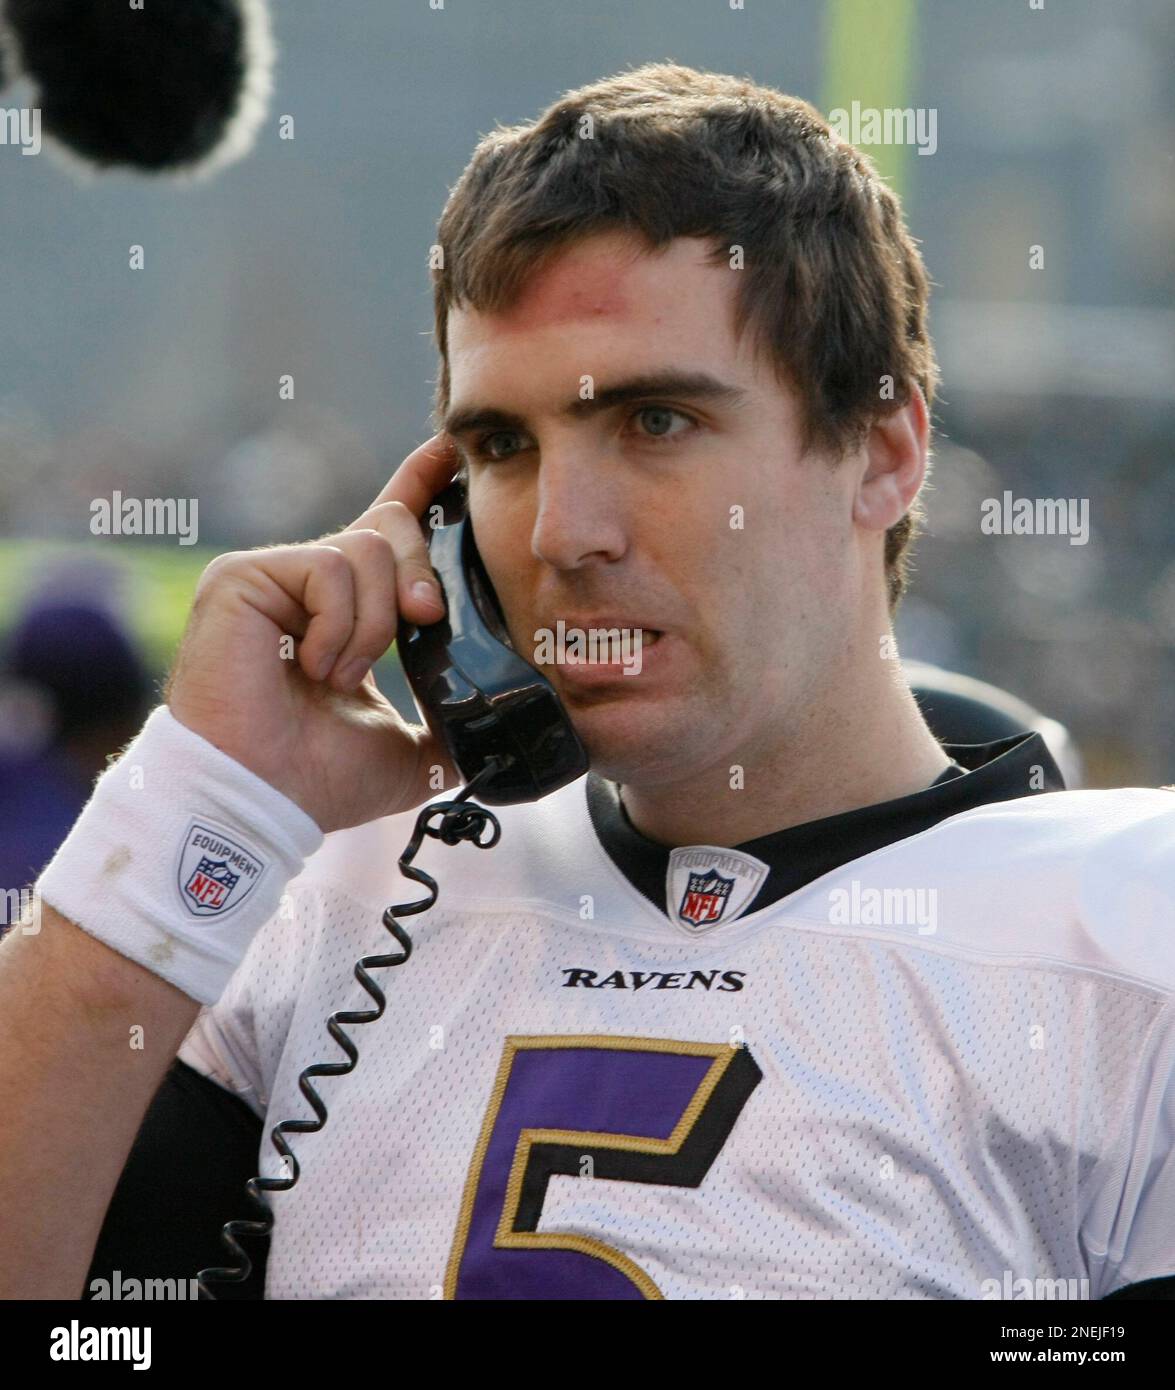 Baltimore Ravens quarterback Joe Flacco talks on a sideline phone during  the NFL football game between the Pittsburgh Steelers and the Baltimore  Ravens in Pittsburgh, Sunday, Dec. 27, 2009. (AP Photo/Keith Srakocic